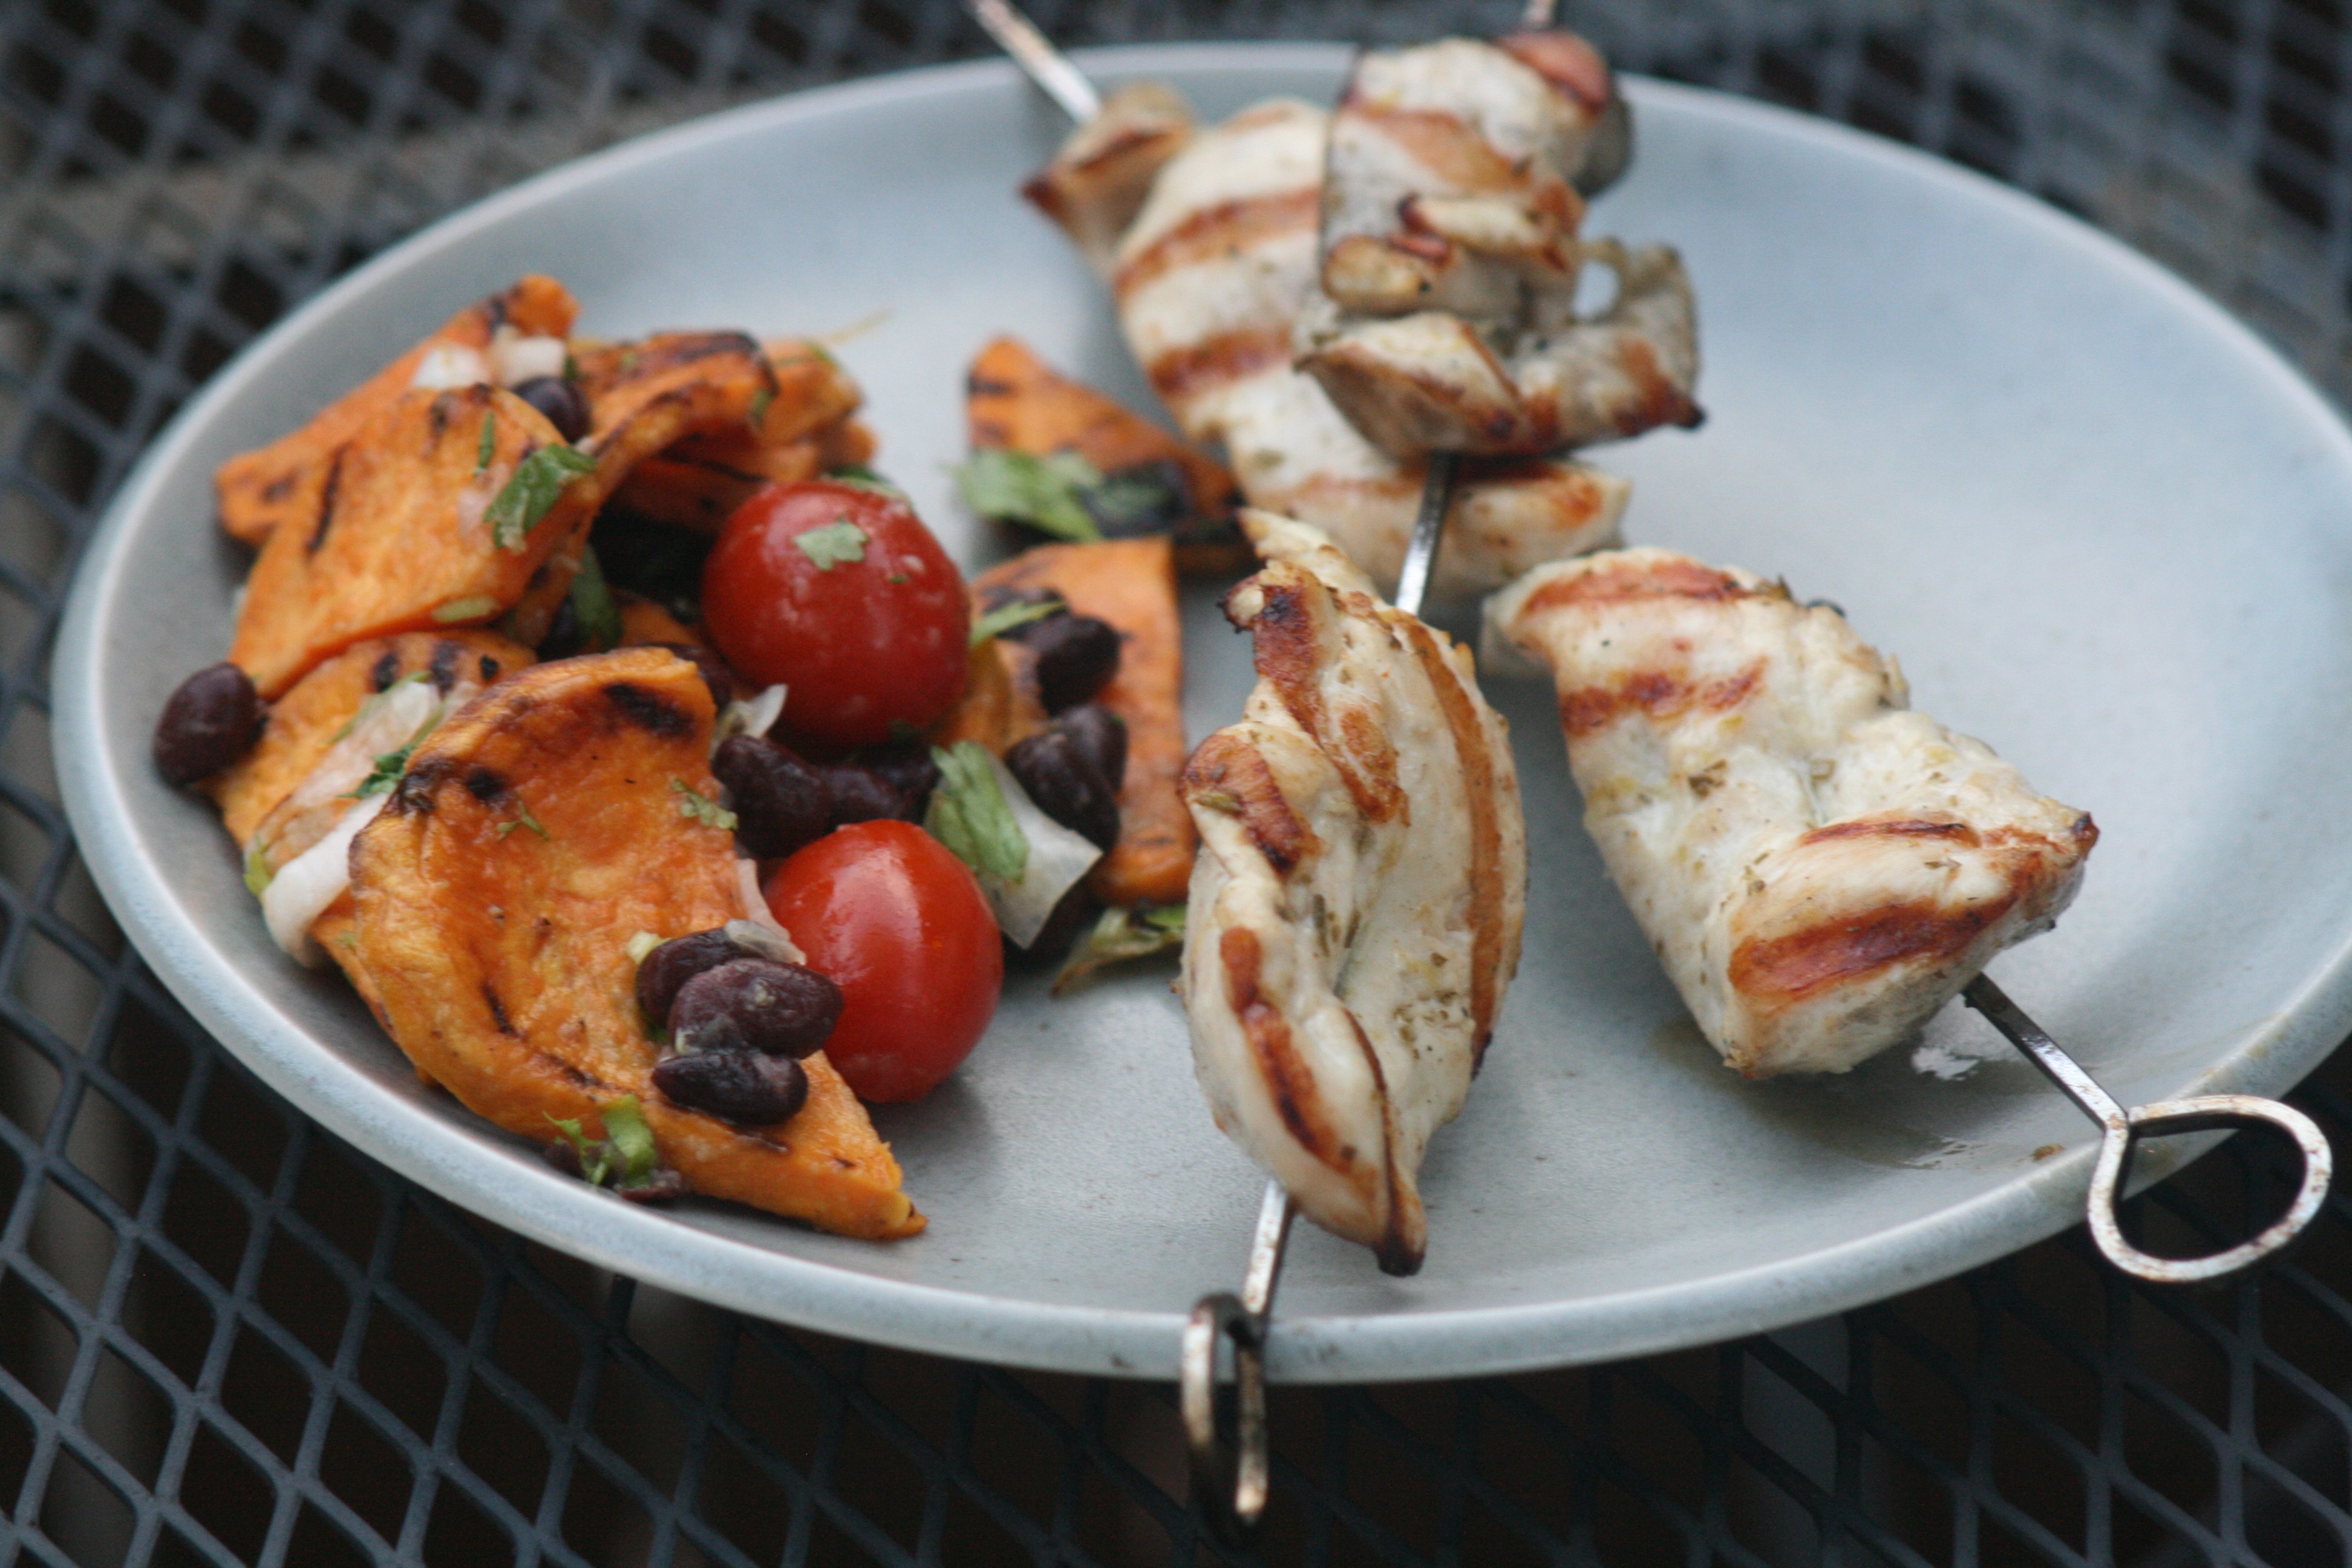 Grilled sweet potato salad and chicken skewers